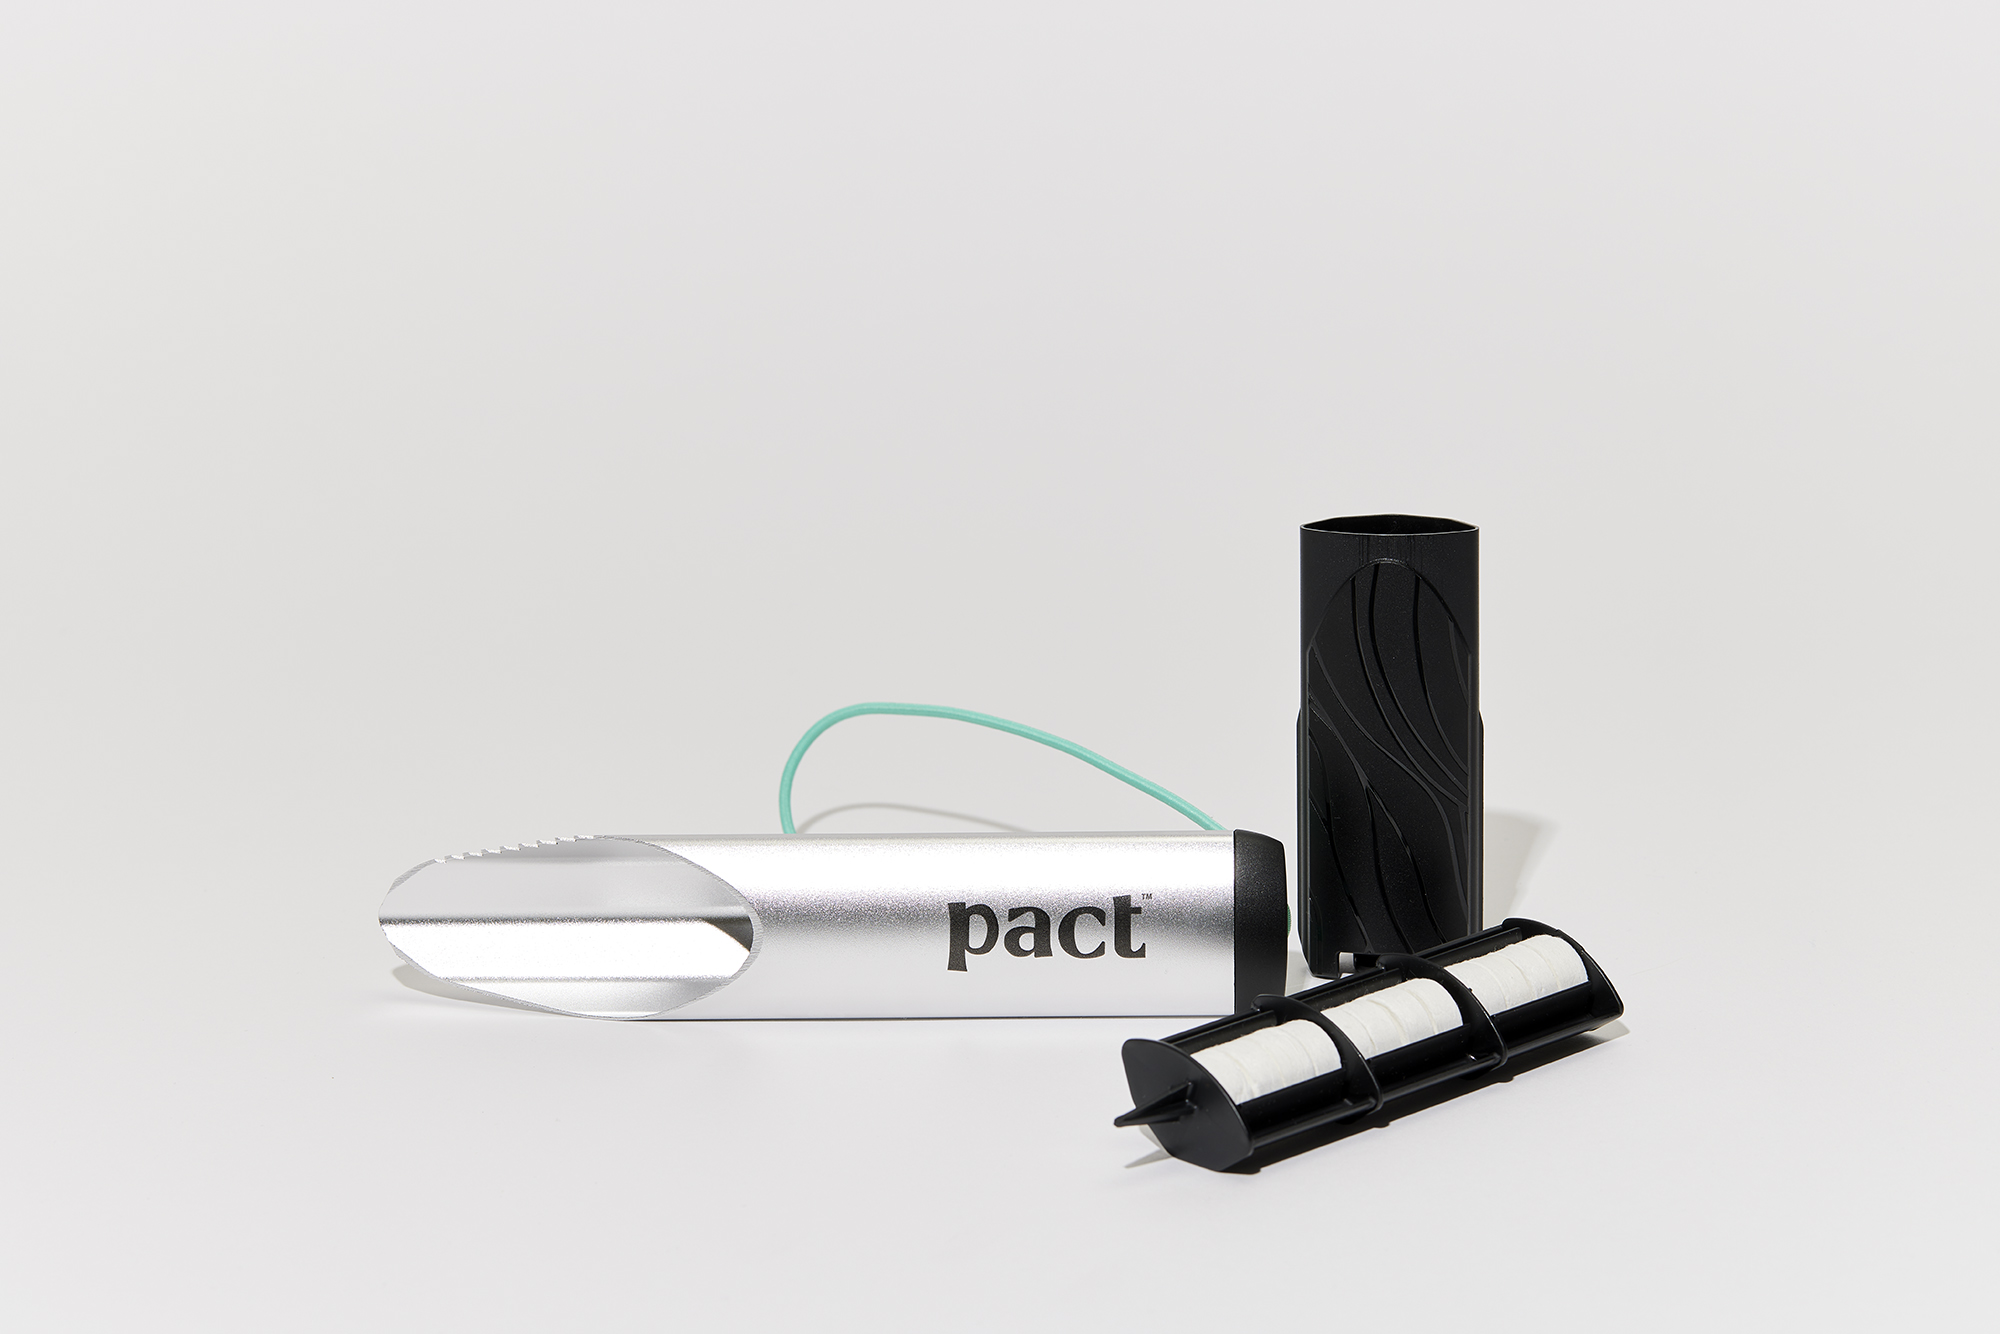 A small silver shovel that says "pact." It is serrated on one side. There is also a black container that holds white round compressed wipes and a black rectangular pouch.